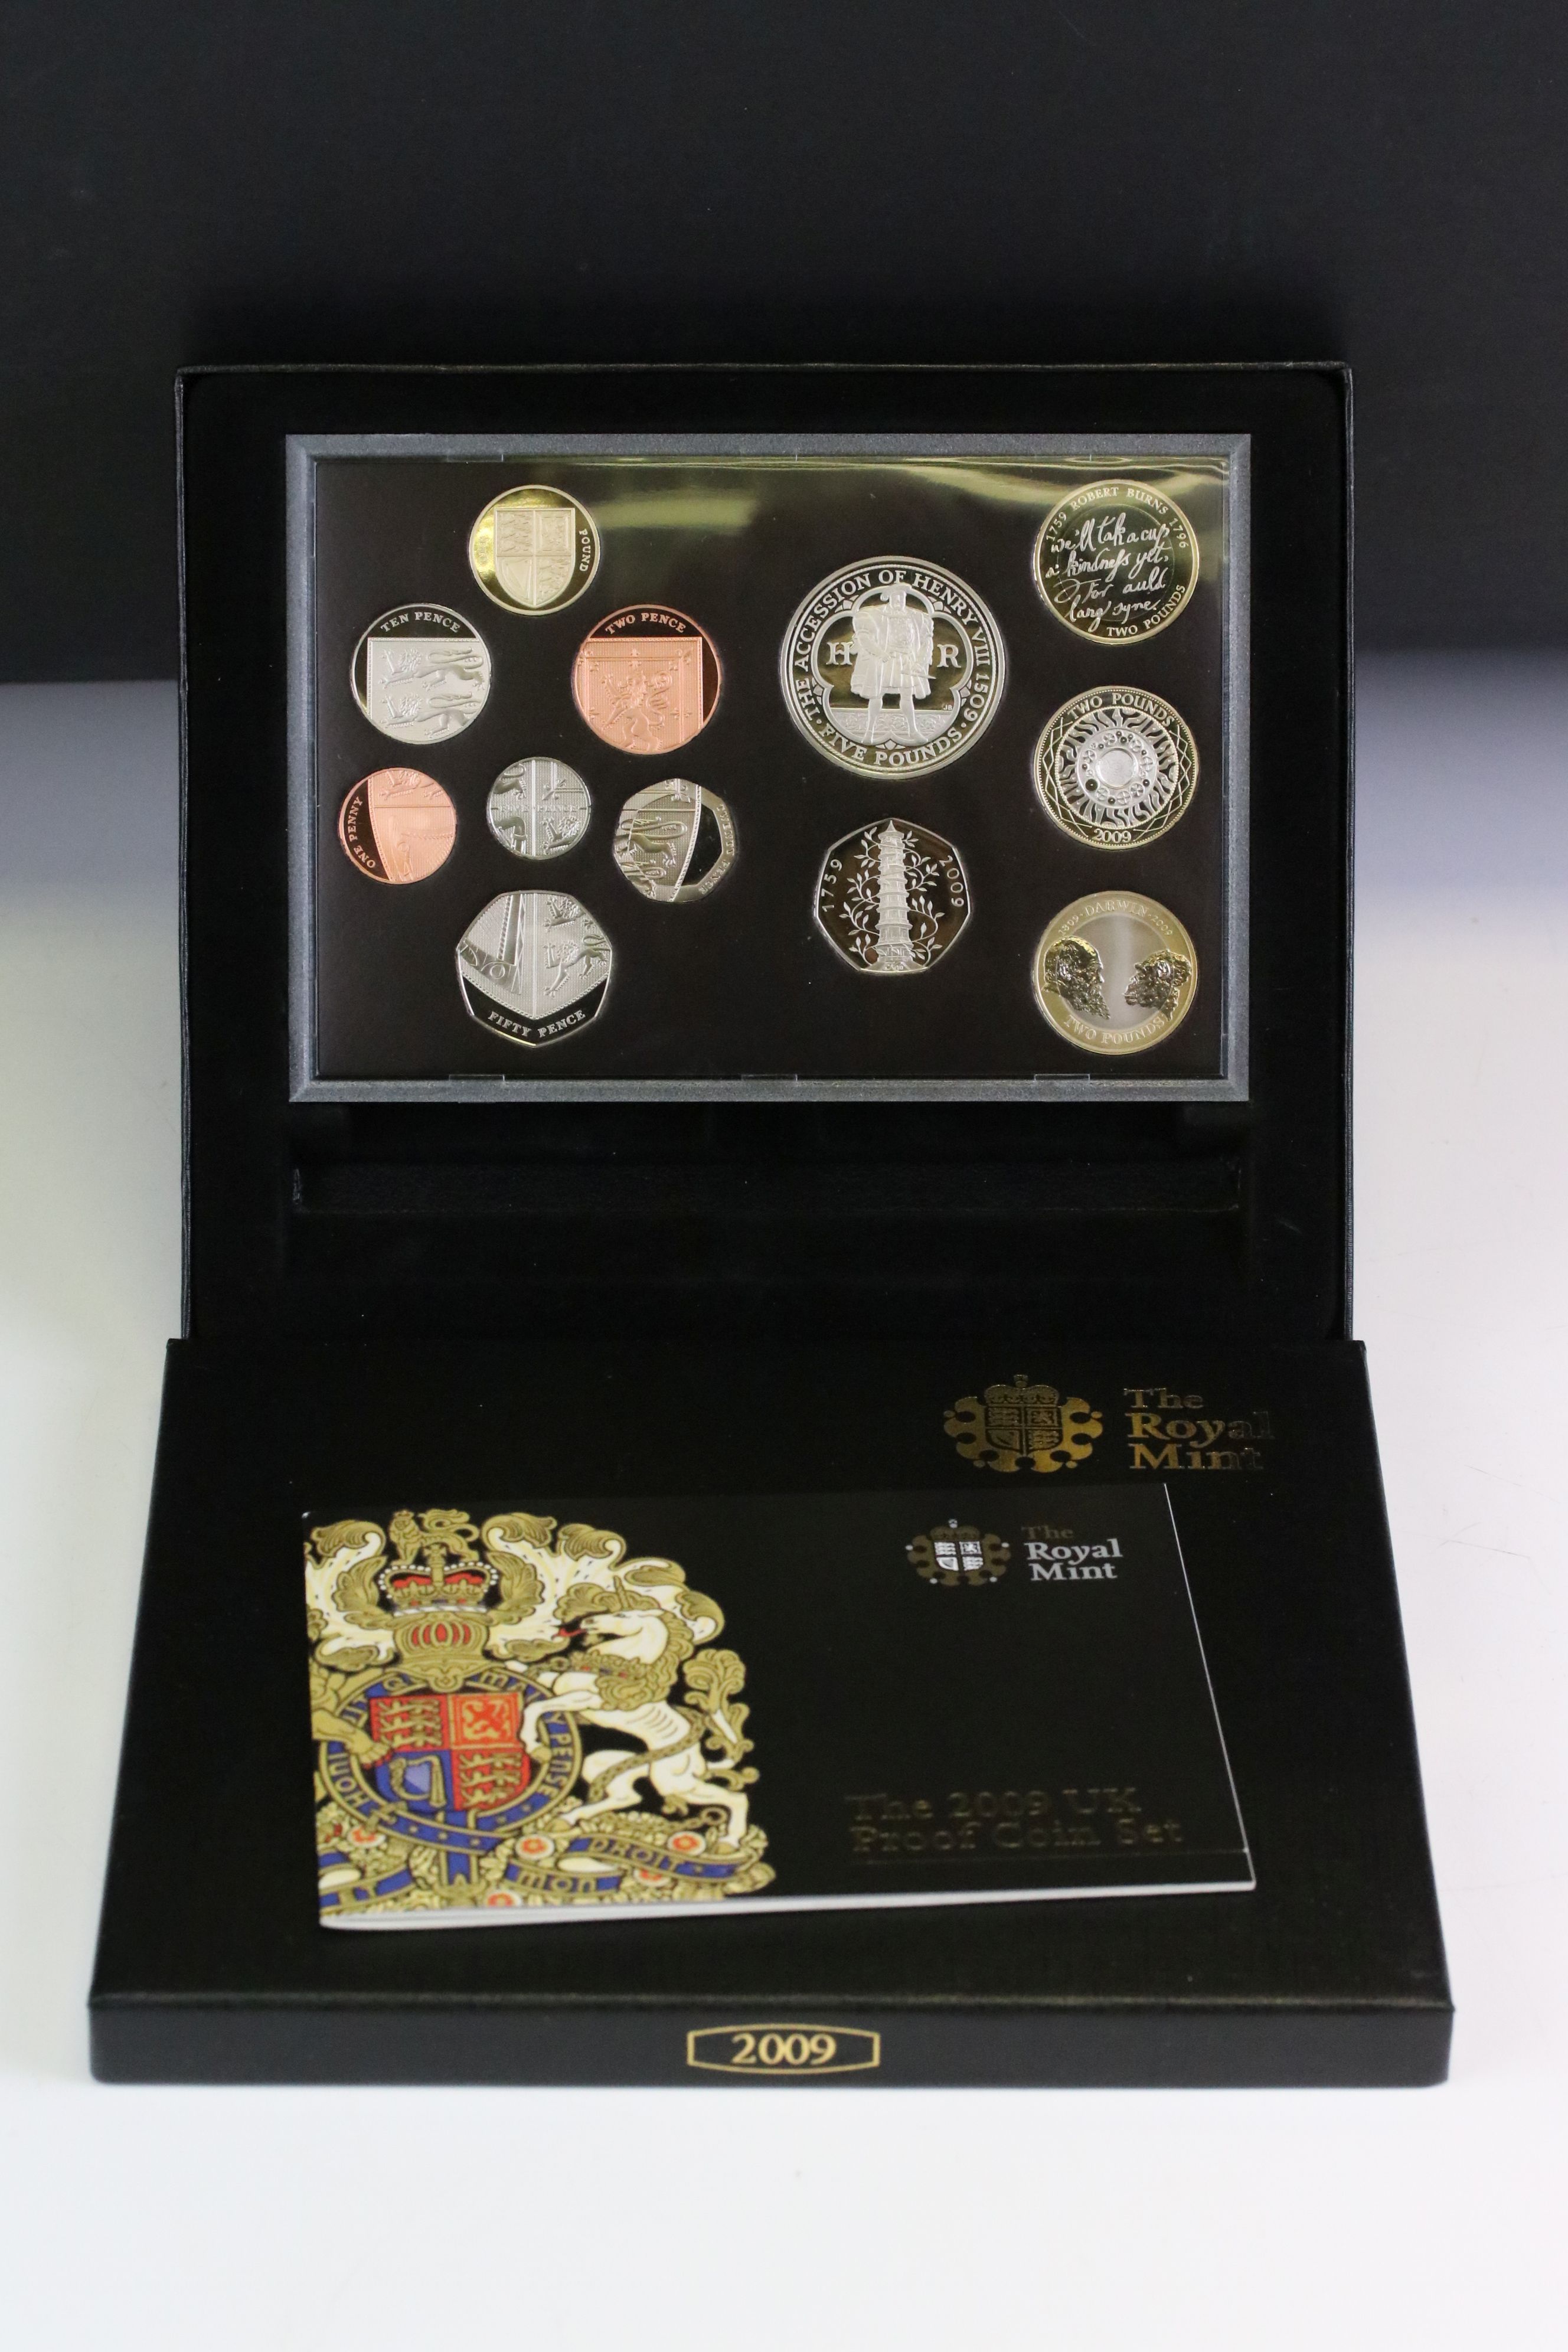 The Royal Mint 2009 UK Proof Coin Set, 12 coins from £5 to 1p, including a 2009 Kew Gardens Fifty